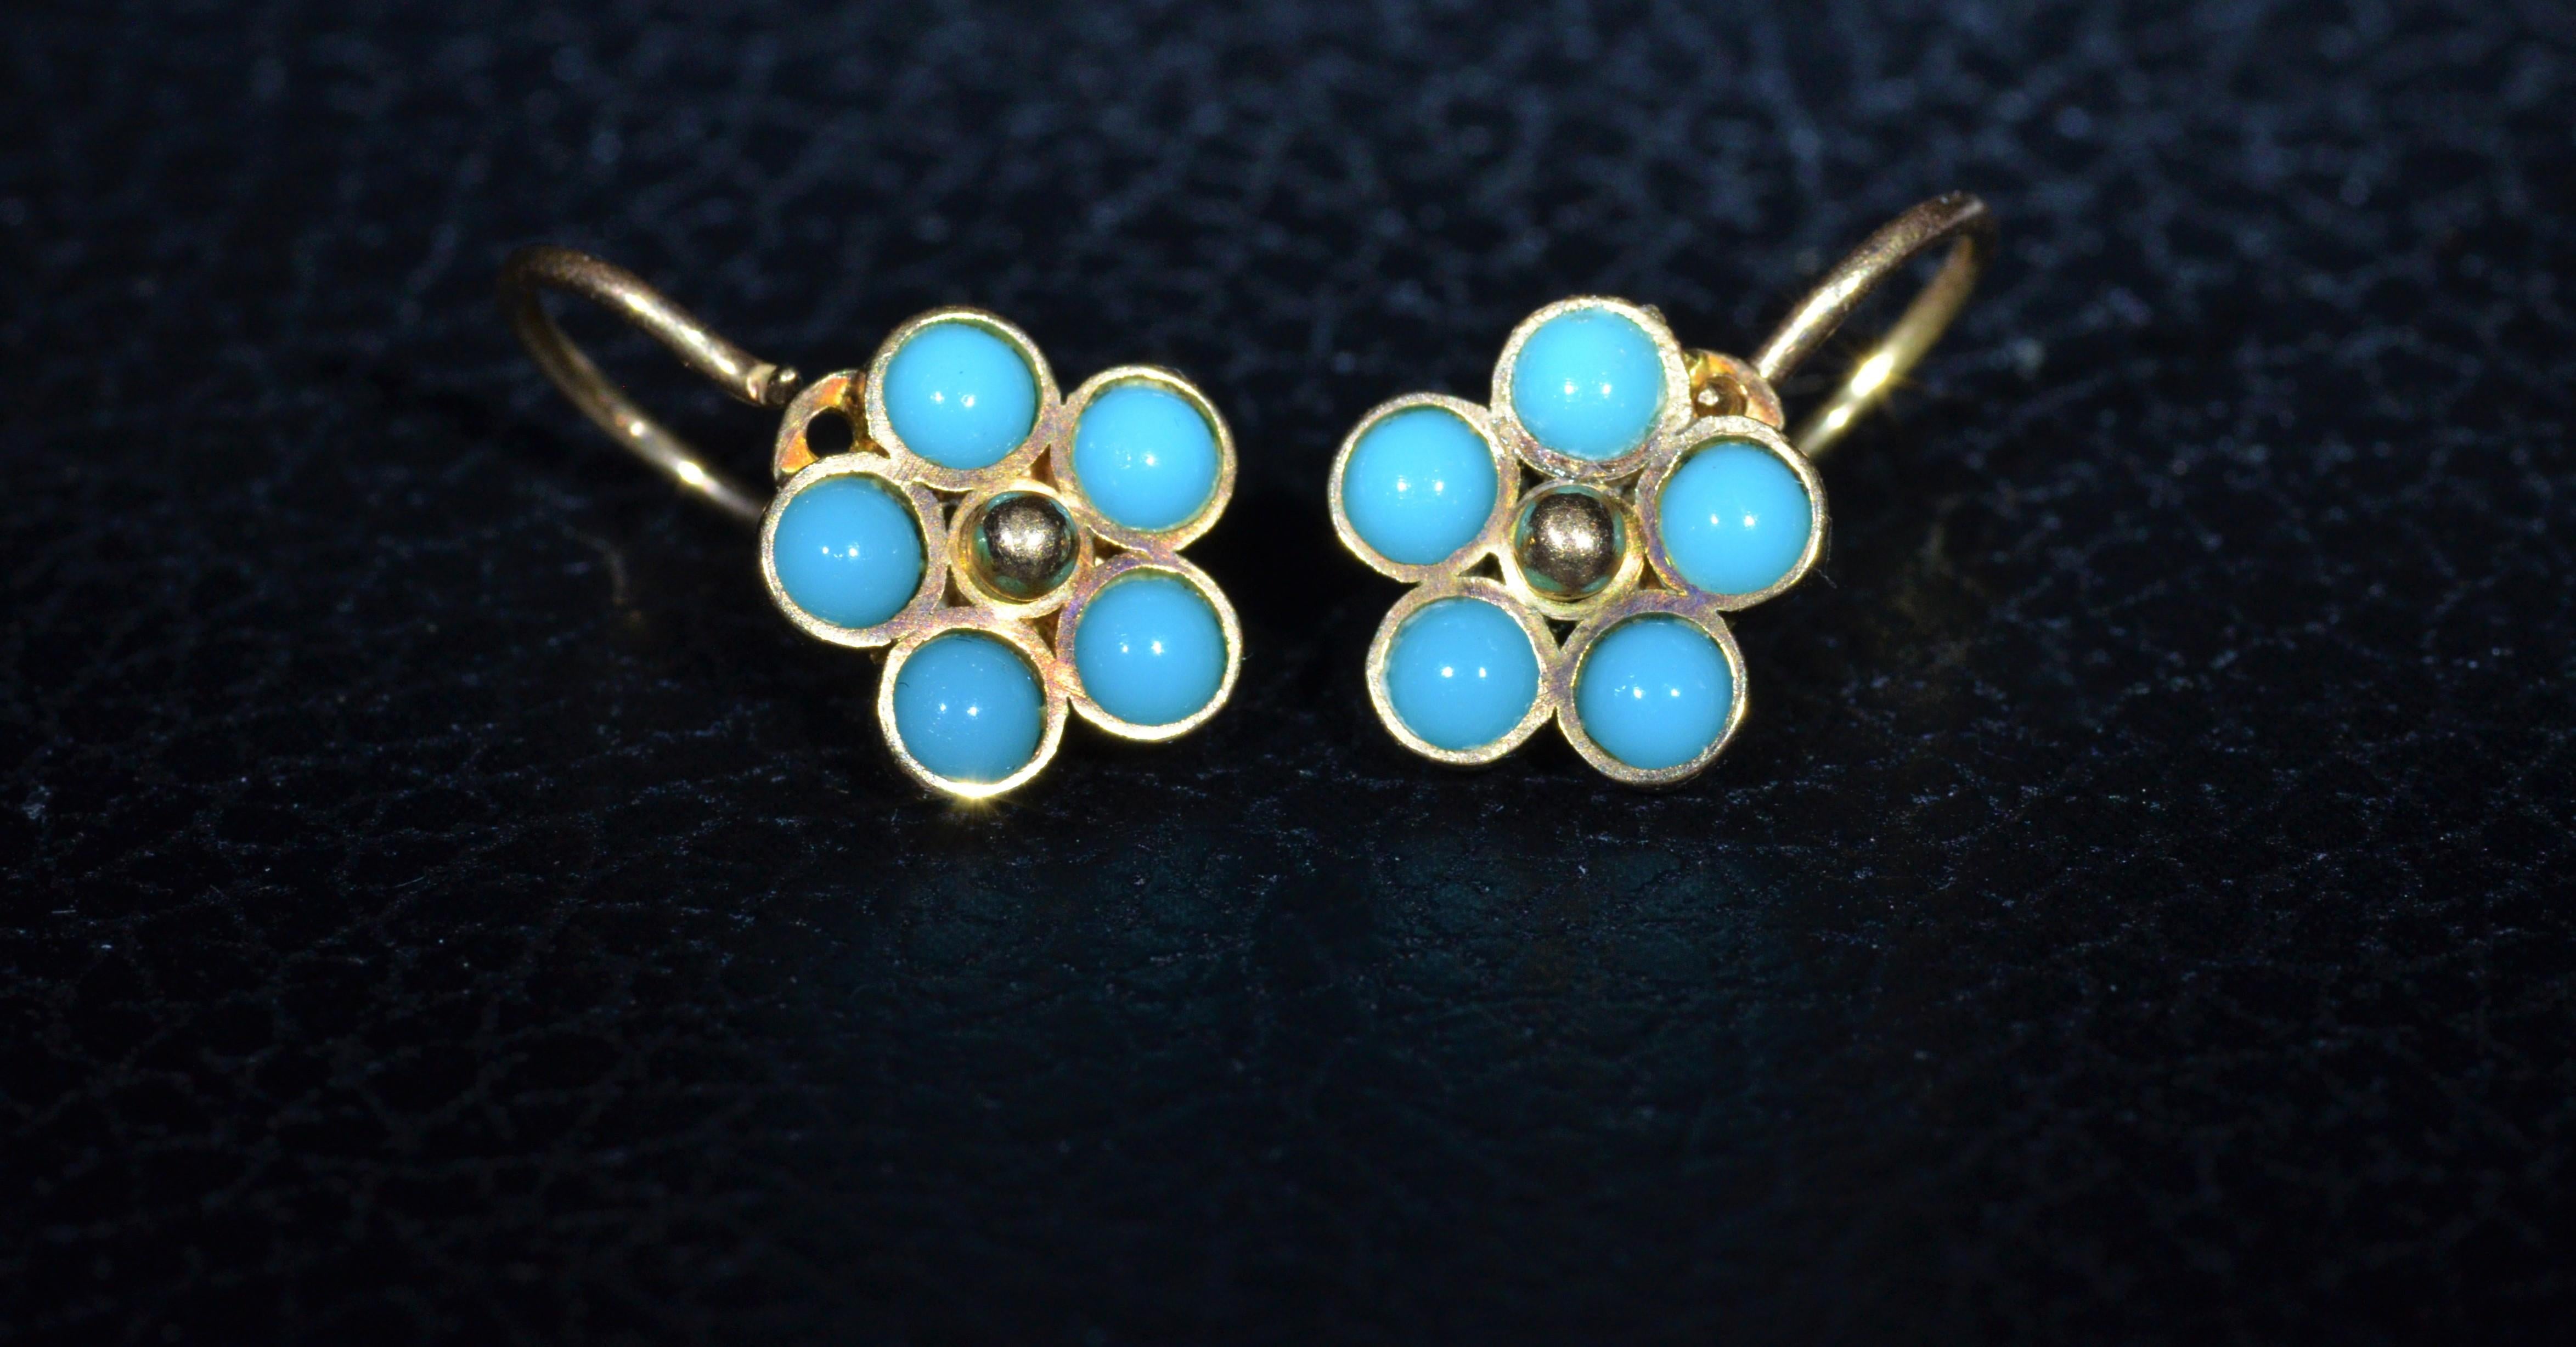 Victorian Antique Rose Gold Flower Earrings Set with Sleeping Beauty Turquoise For Sale